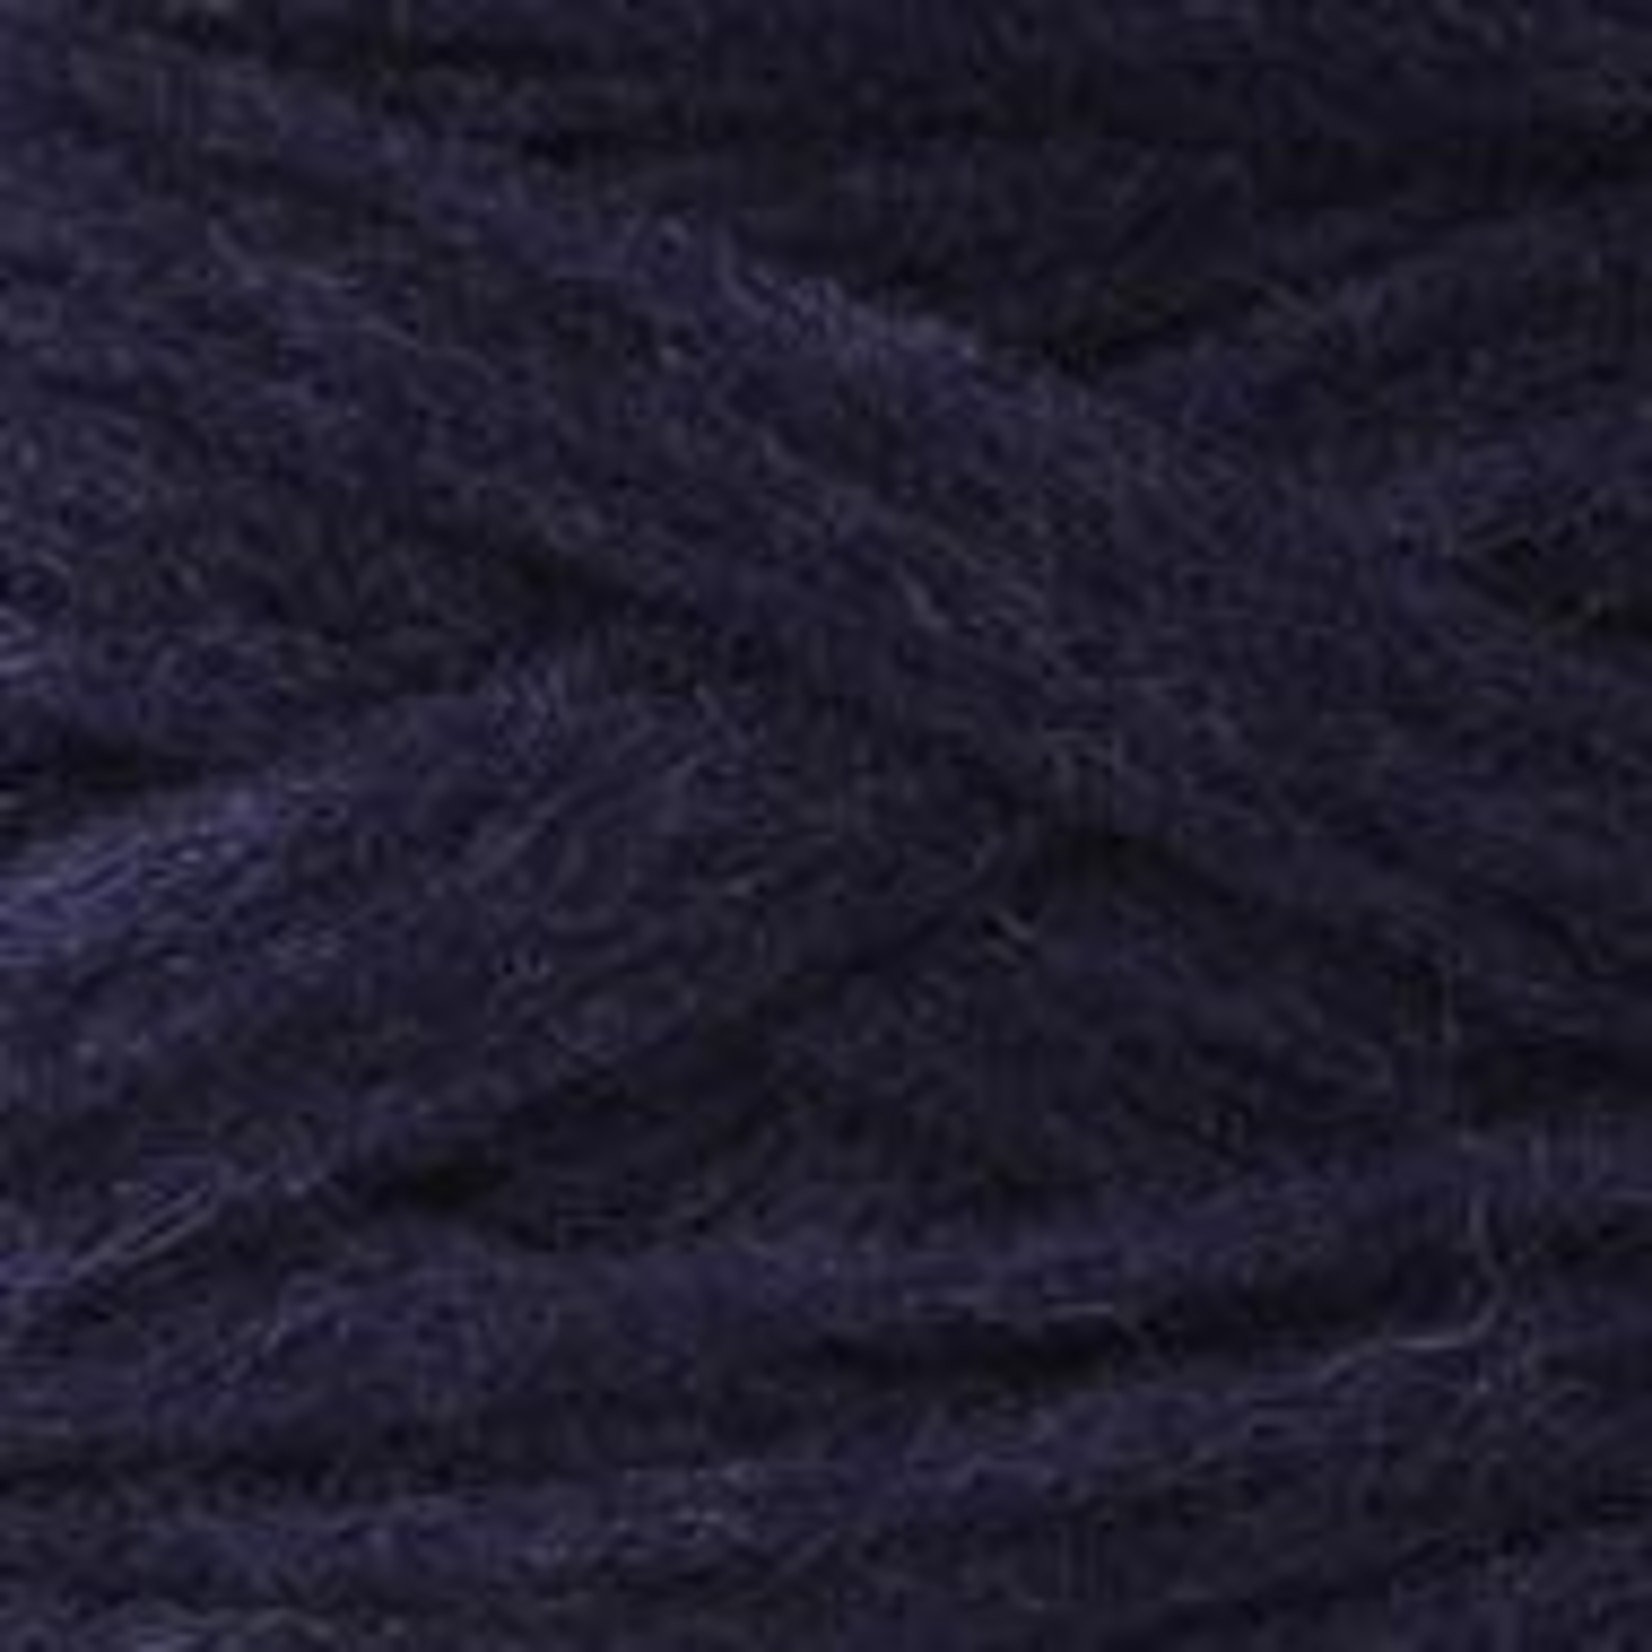 Briggs & Little Country Roving Yarn by Briggs & Little (5-ply, 100% Wool, Super Bulky)